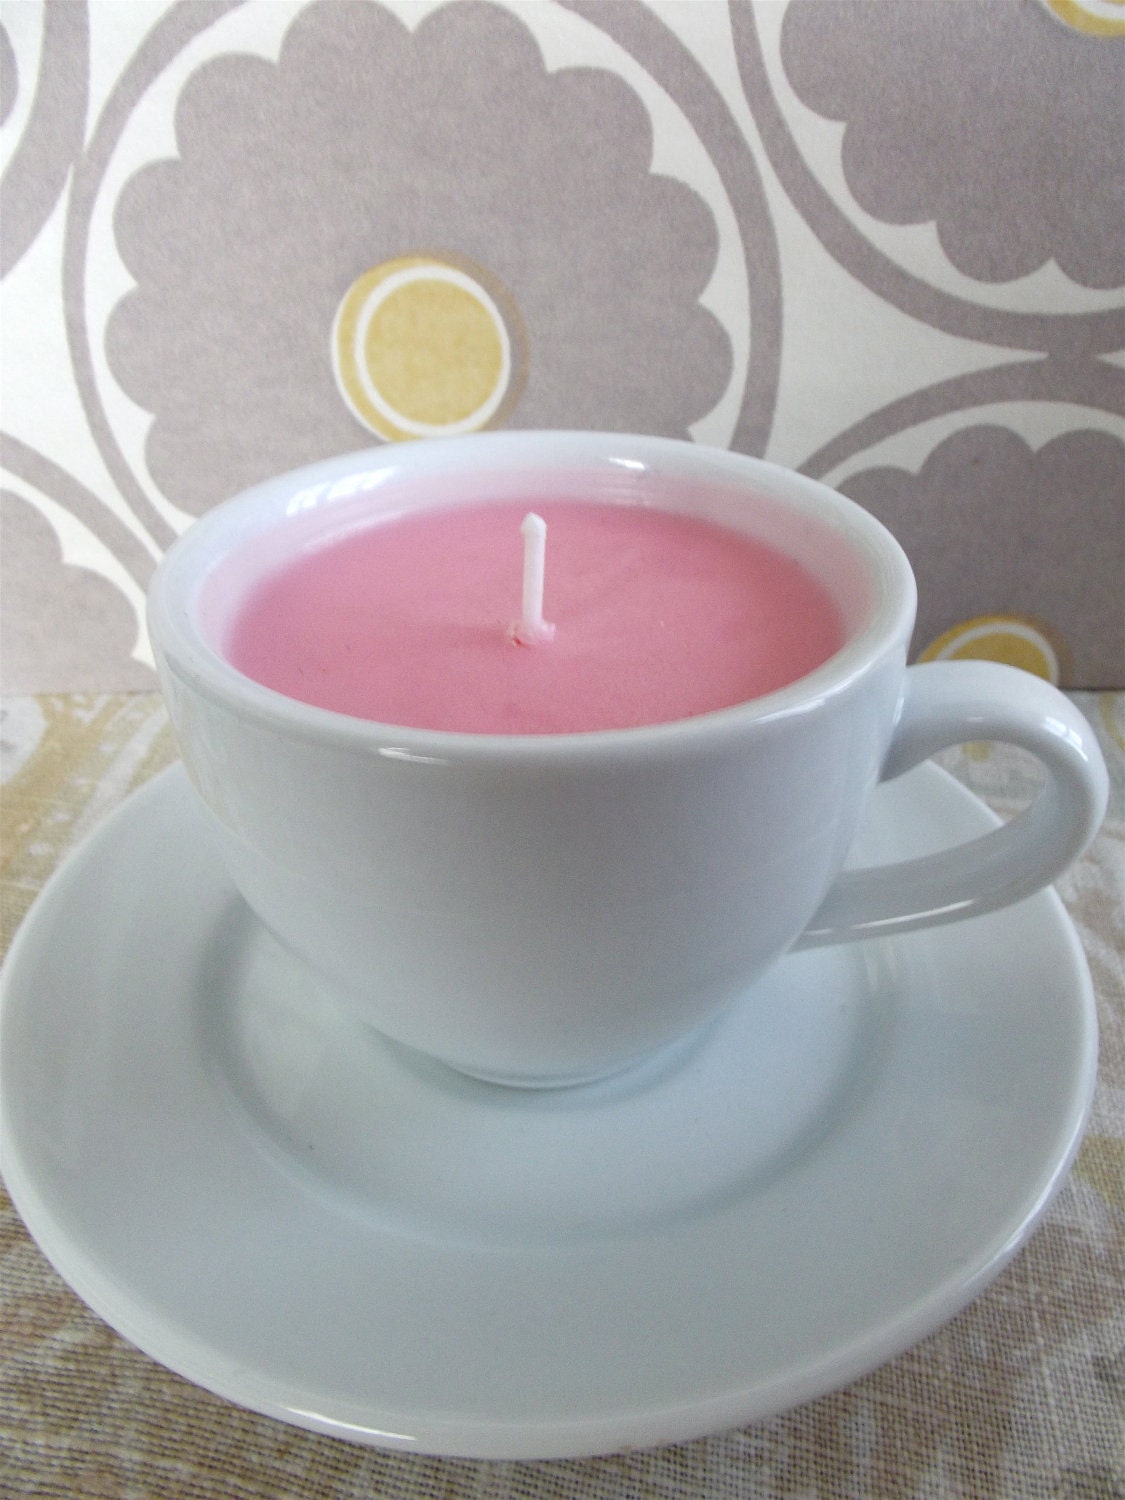 POMEGRANATE SAGE Handmade Natural Soy Teacup Candle (6 oz.) Recycled/Repurposed/Upcycled